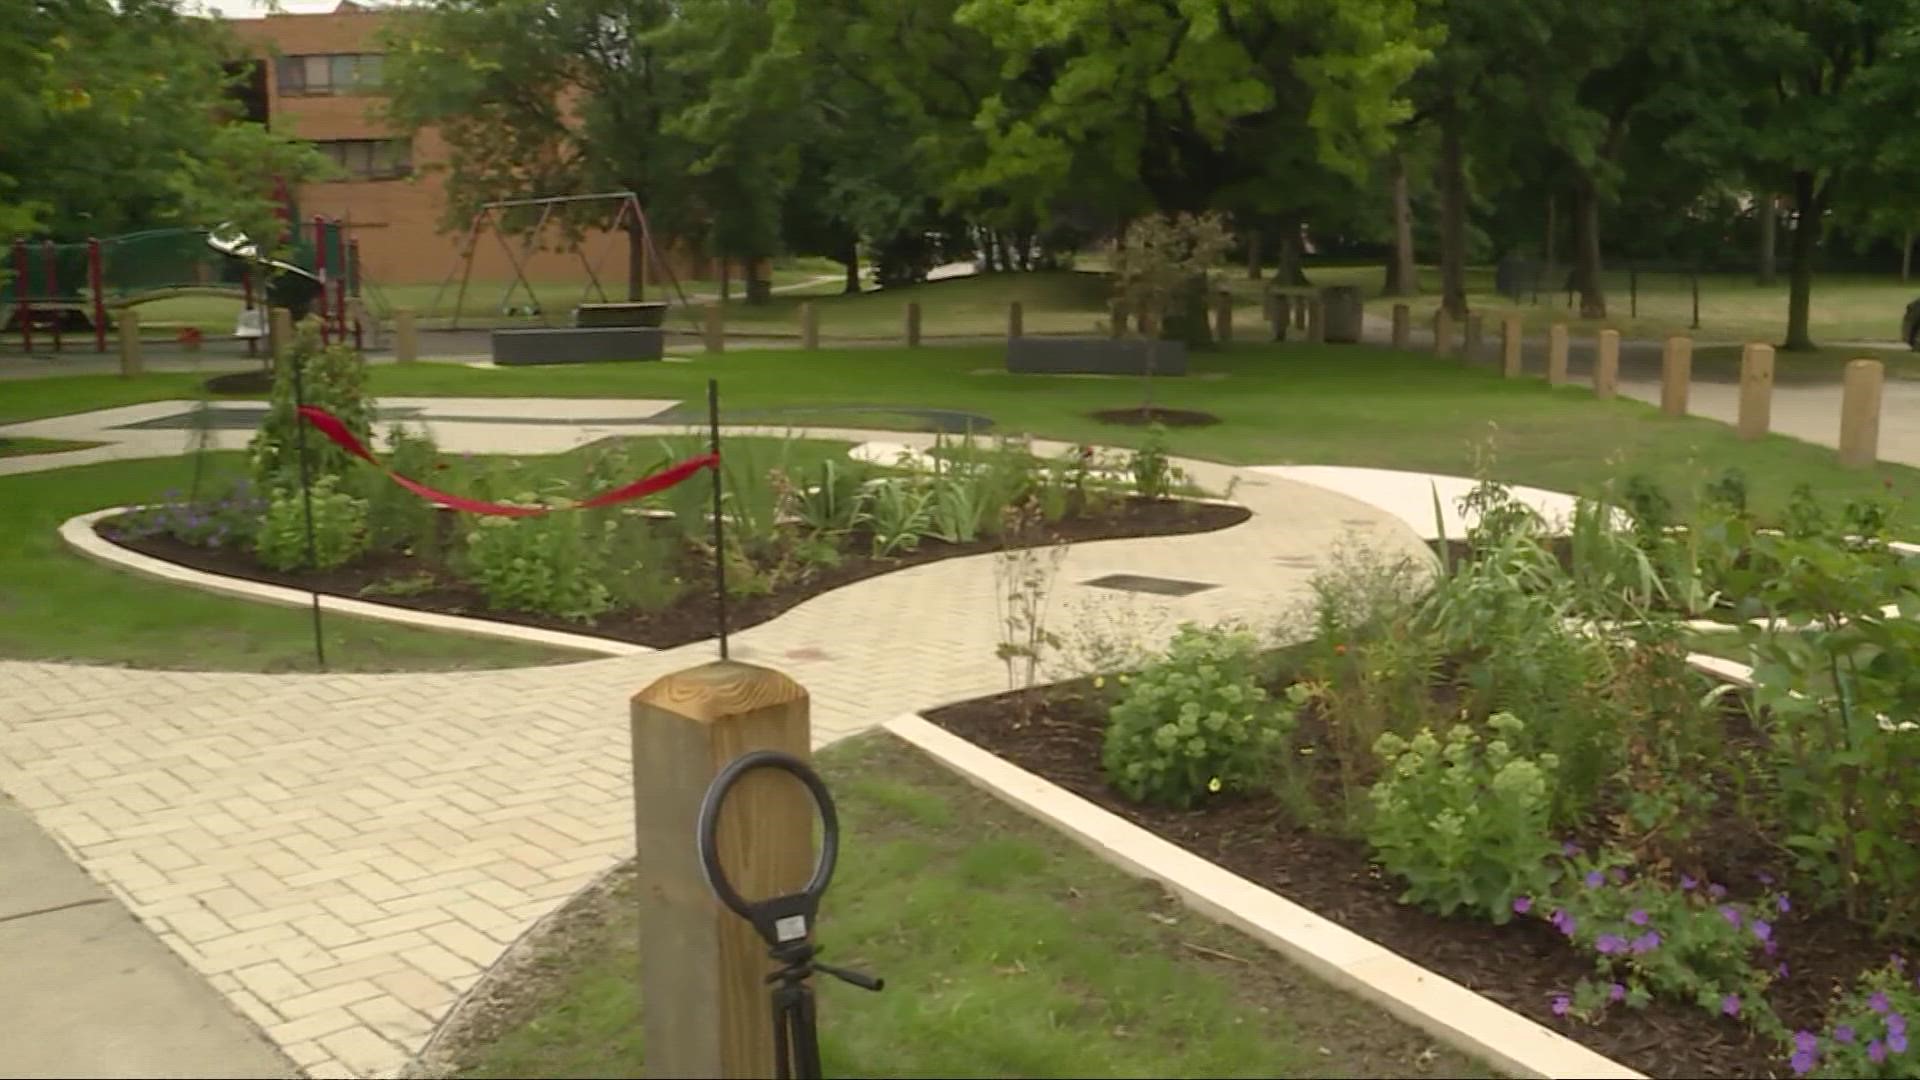 The grand opening of The Rice Butterfly Memorial took place on Saturday, July 16, at 11 a.m.